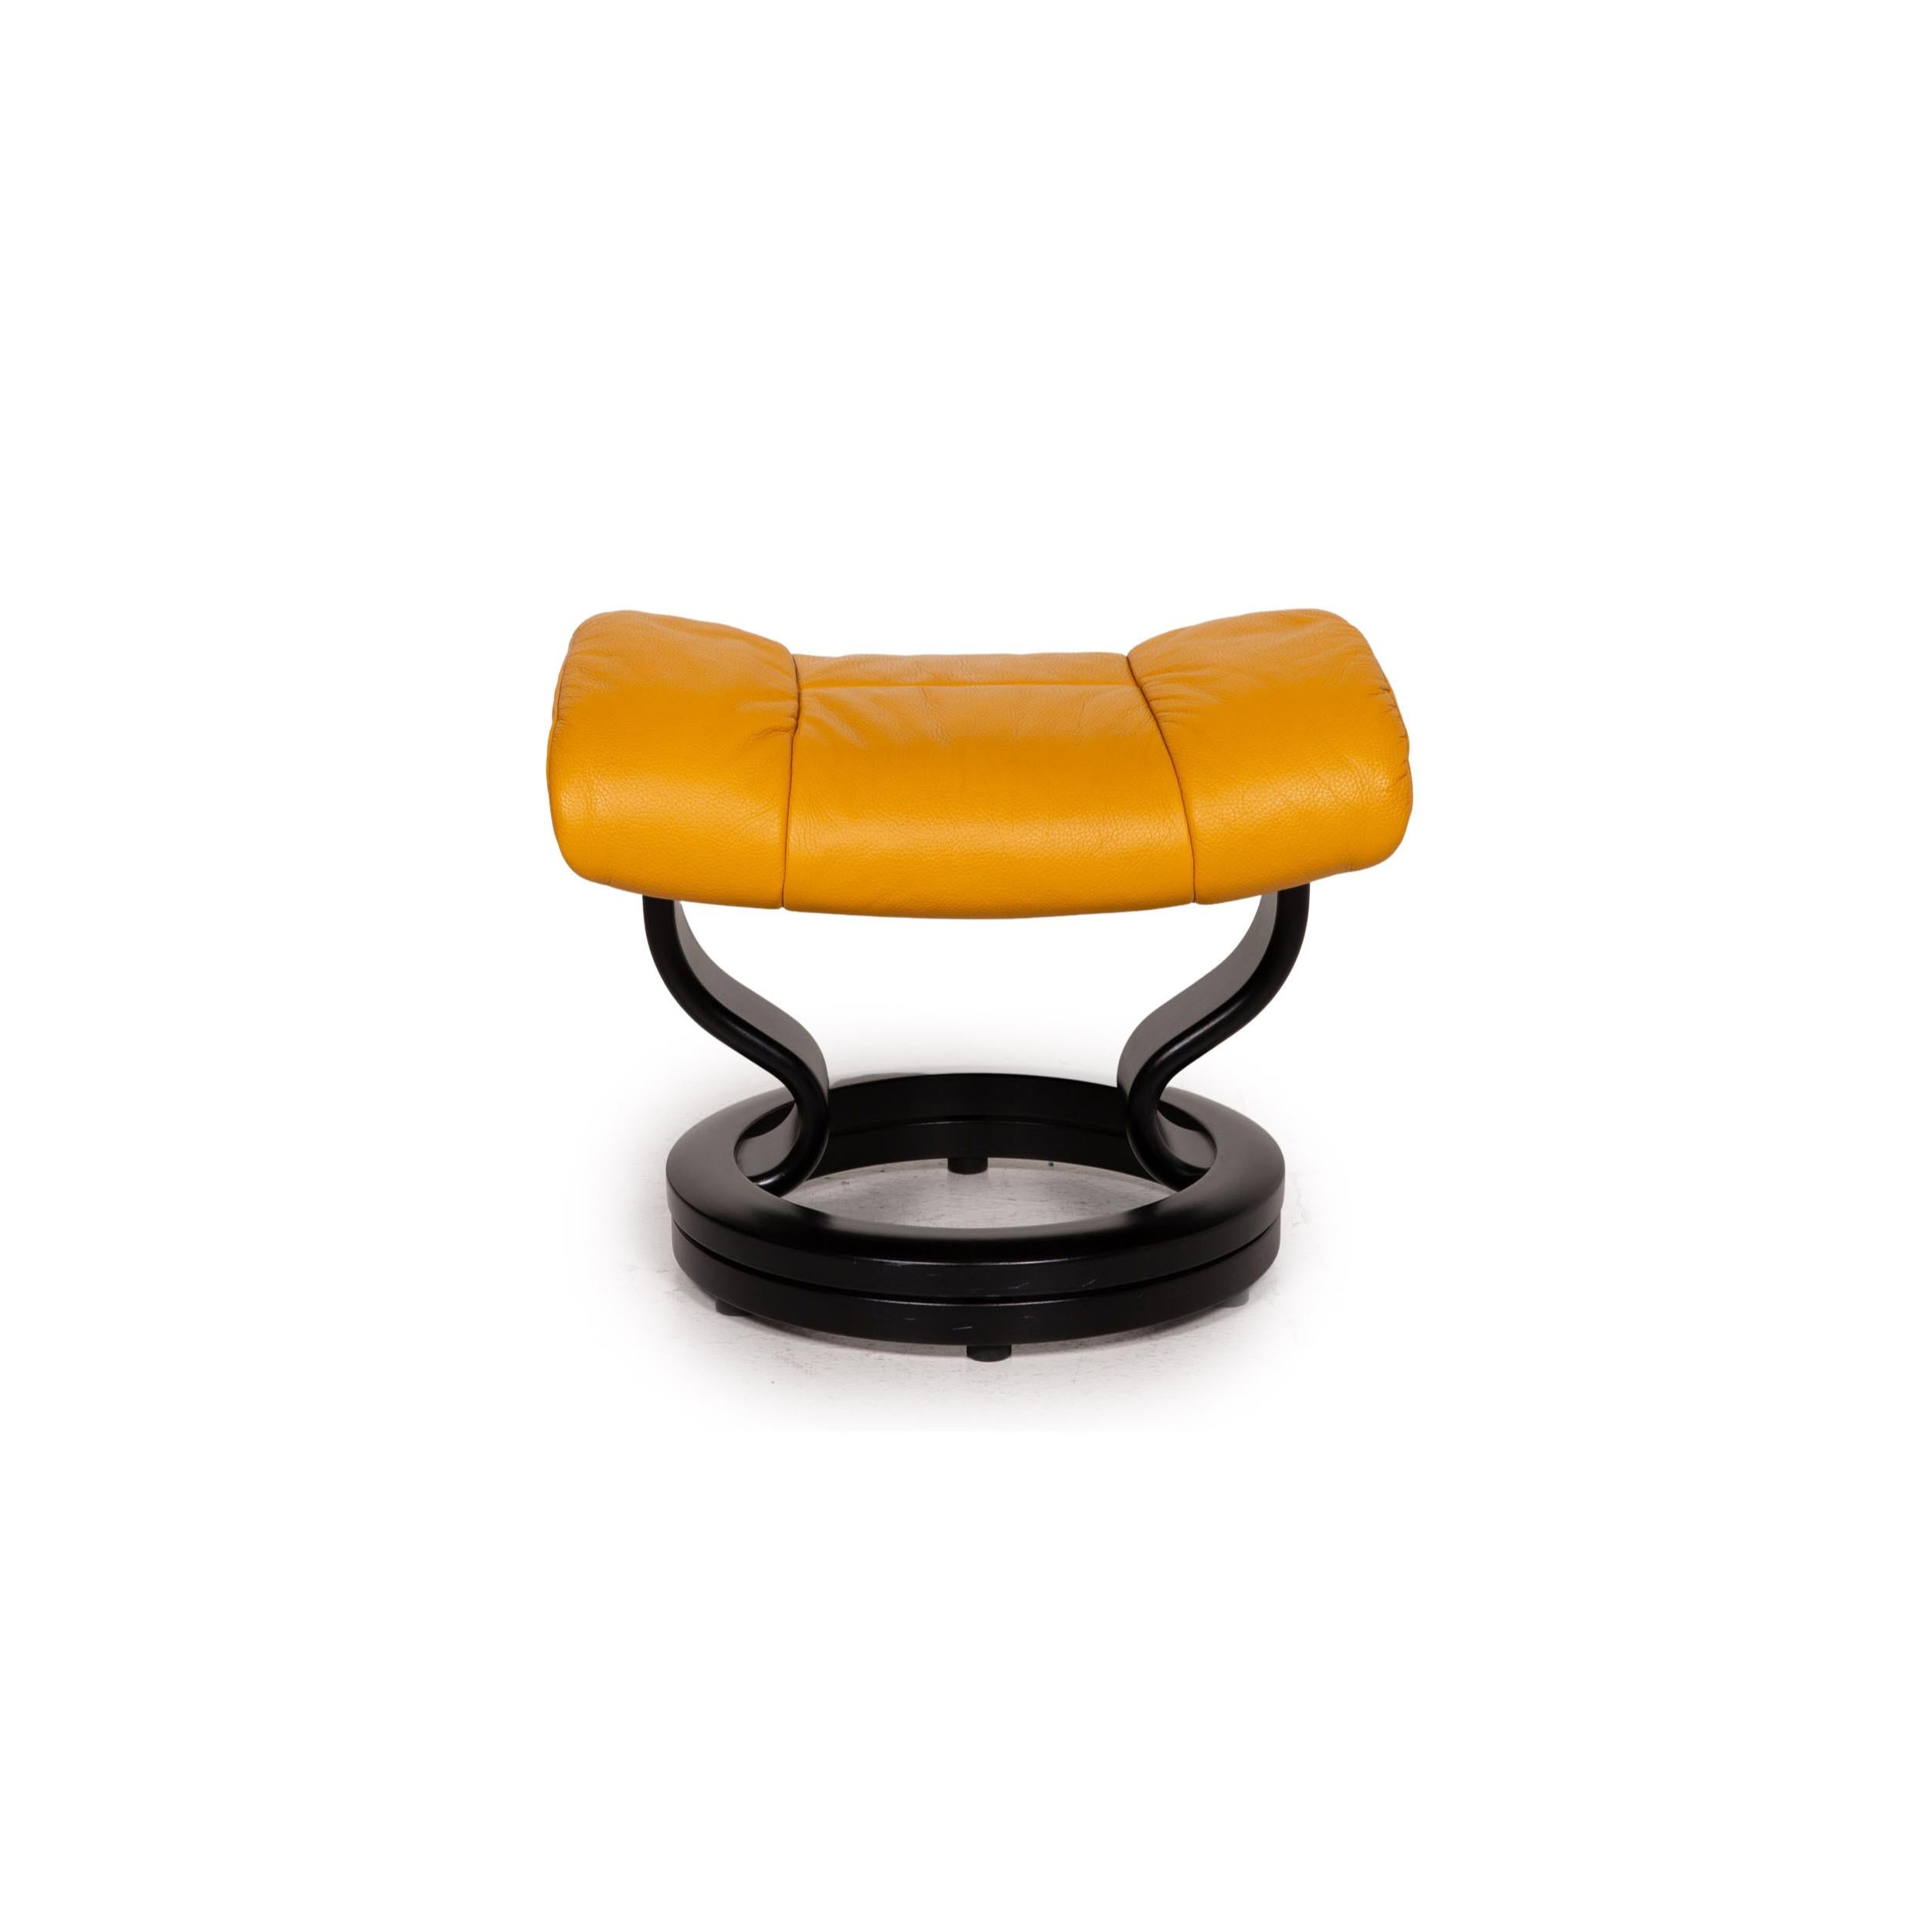 Stressless Reno Leather Recliner Yellow Armchair 5